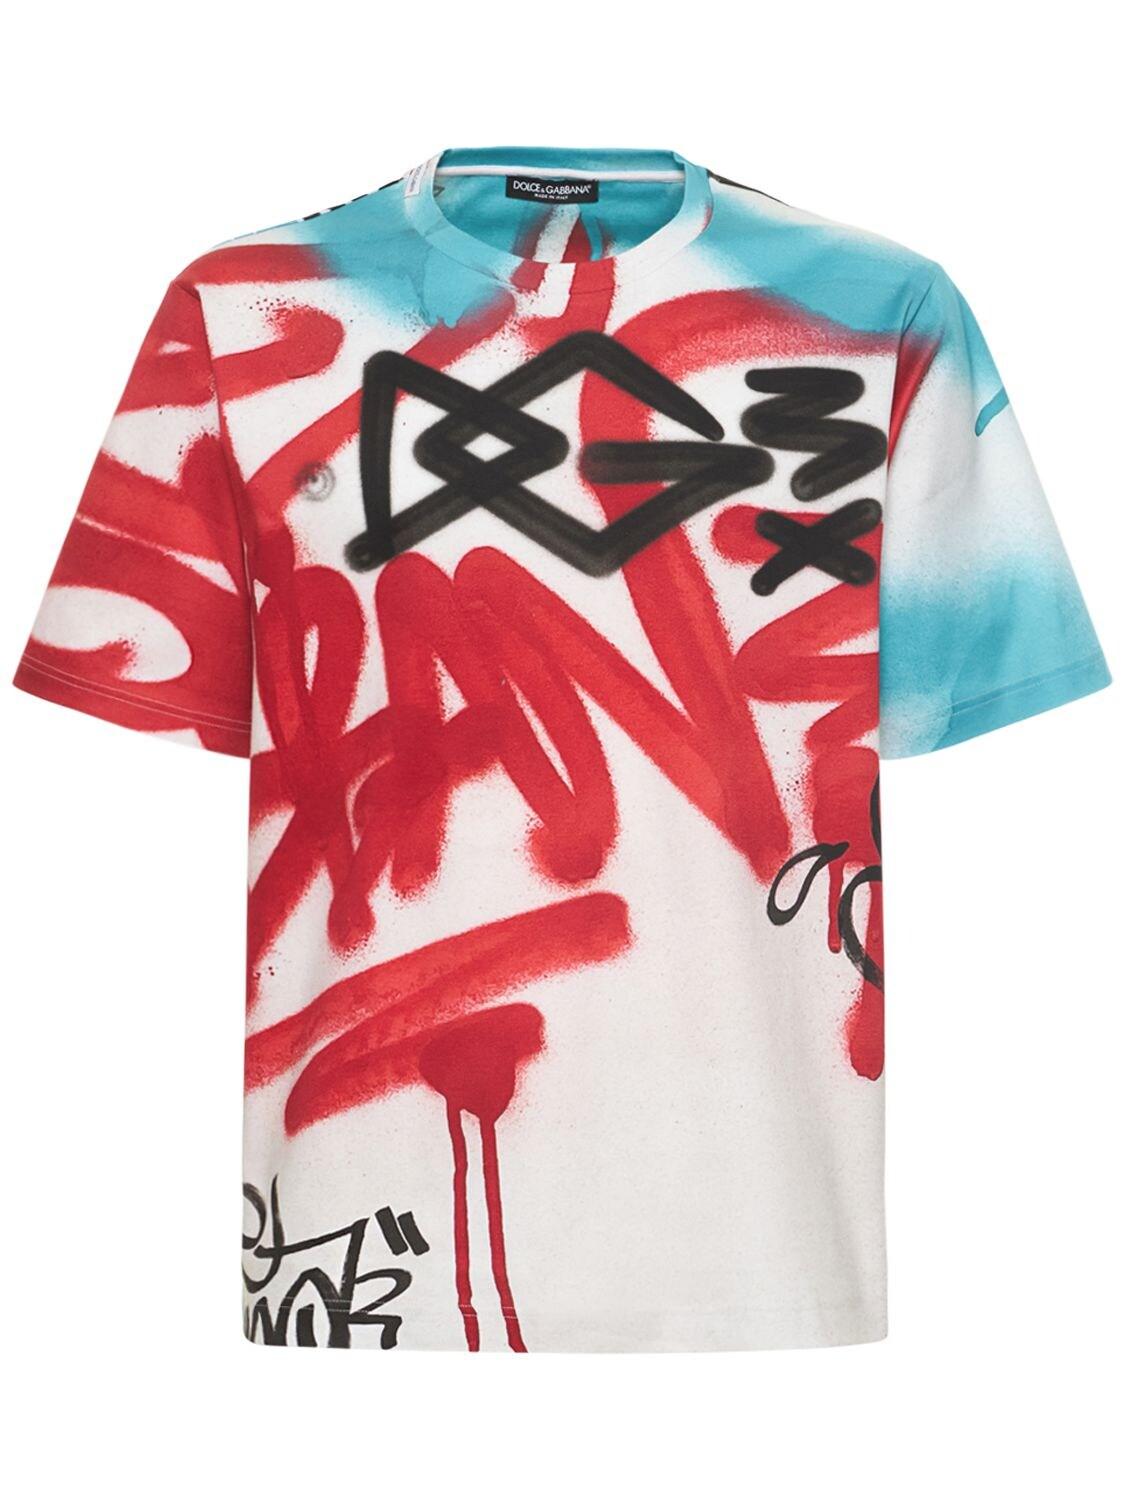 Dolce & Gabbana Graffiti Print Cotton Jersey T-shirt in Red for Men | Lyst